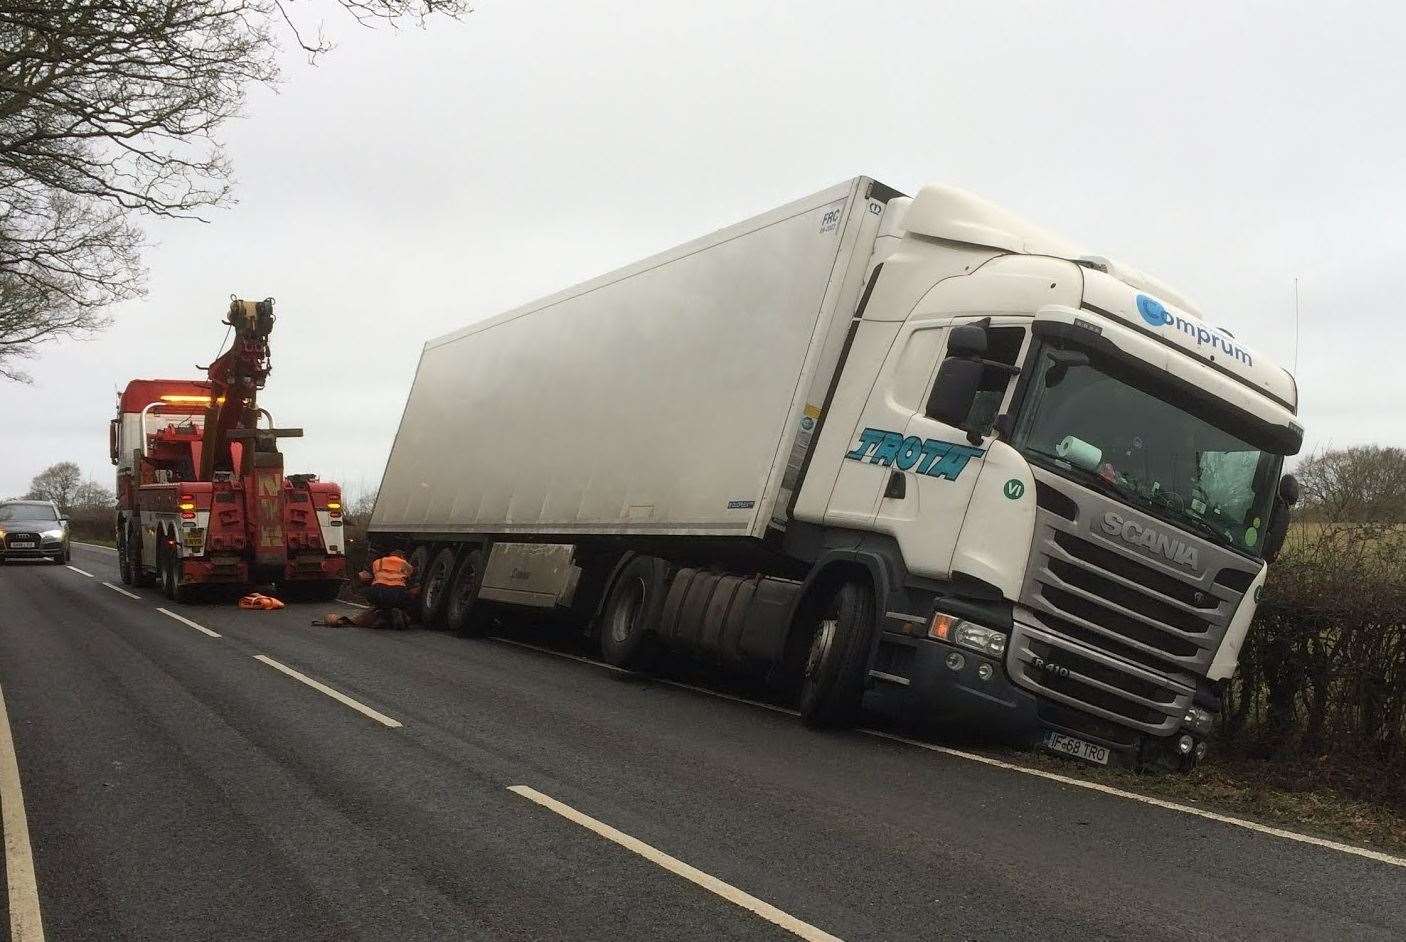 The articulated lorry veered off the road near Biddenden